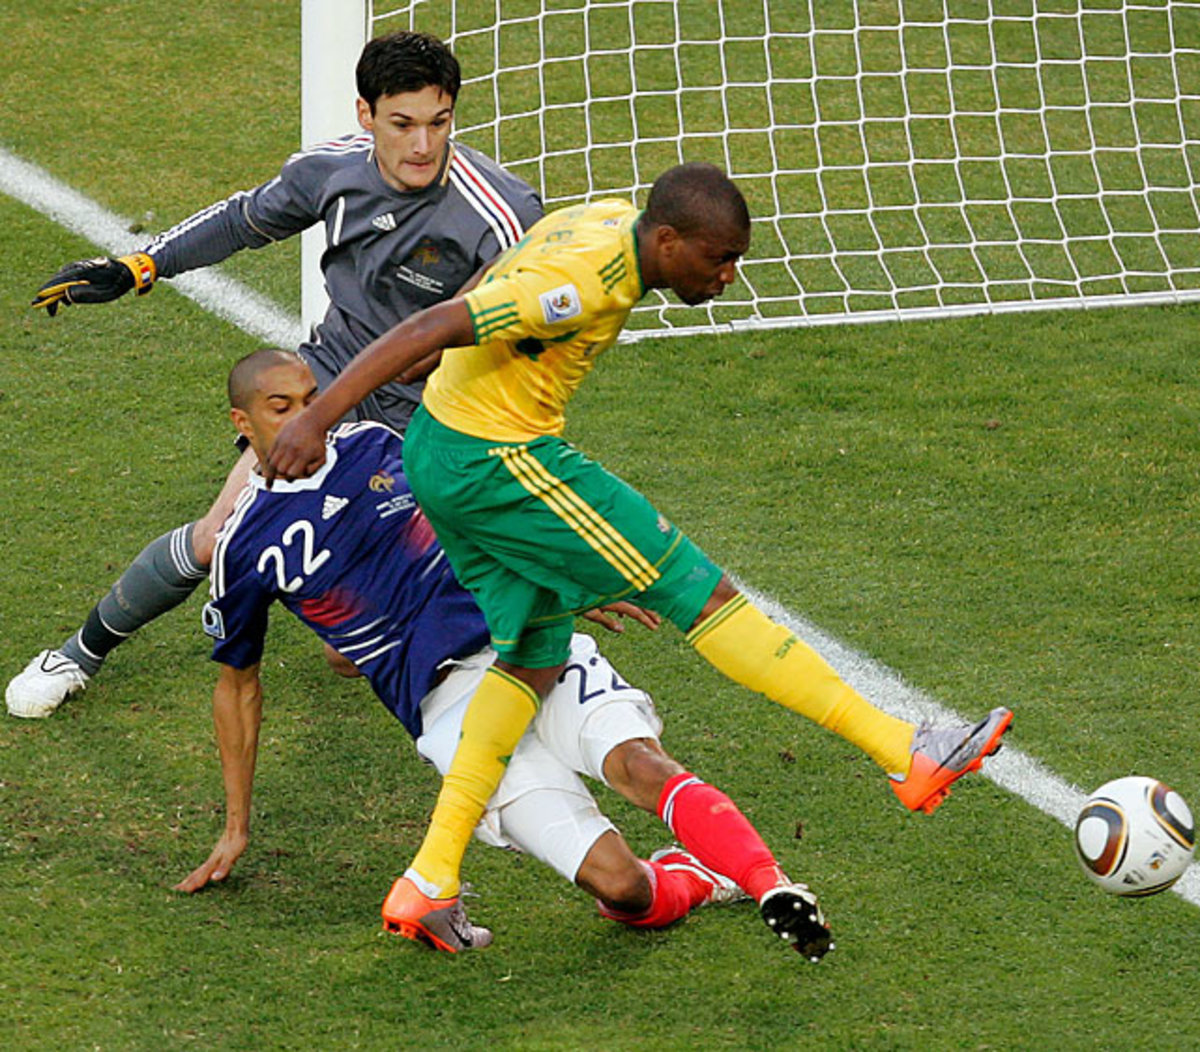 South Africa 2, France 1